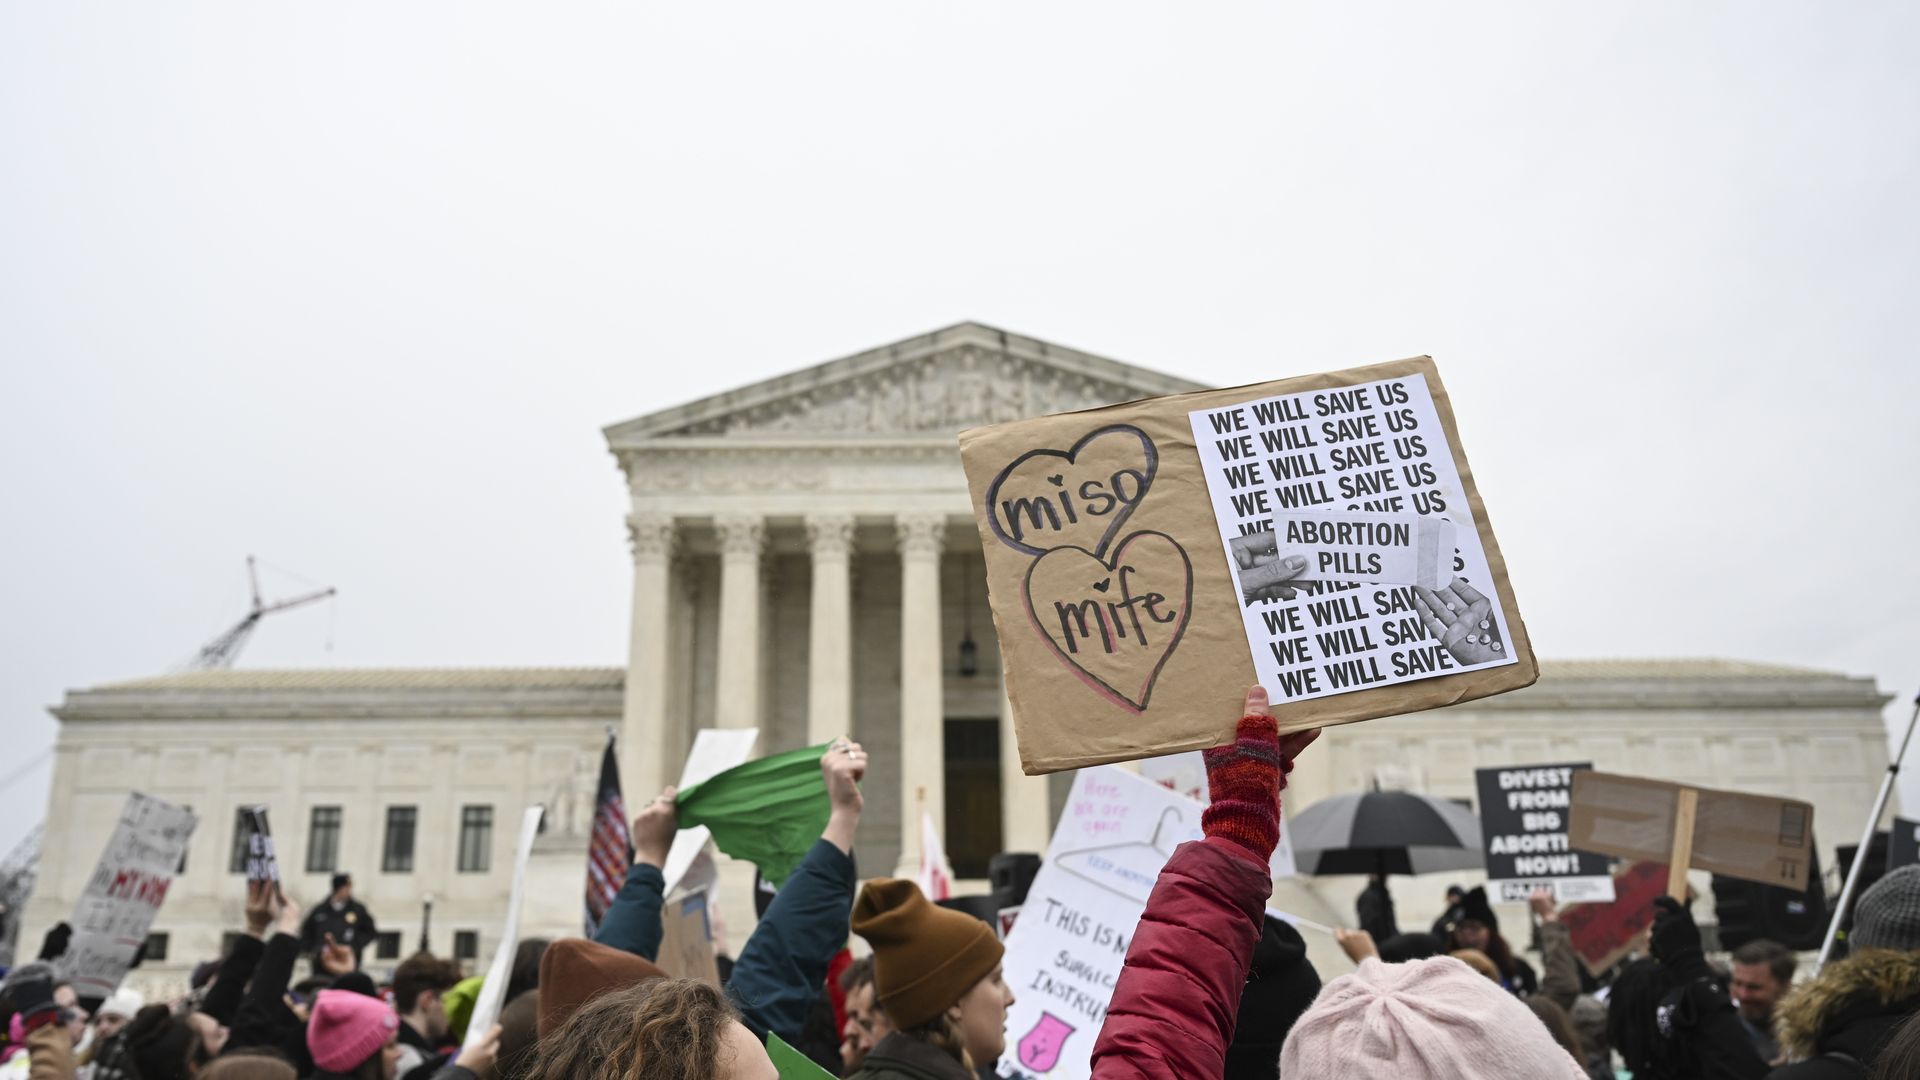 Picture of a person holding a sign that says "miso" and "mife" in an abortion rights protest in front of the Supreme Court building